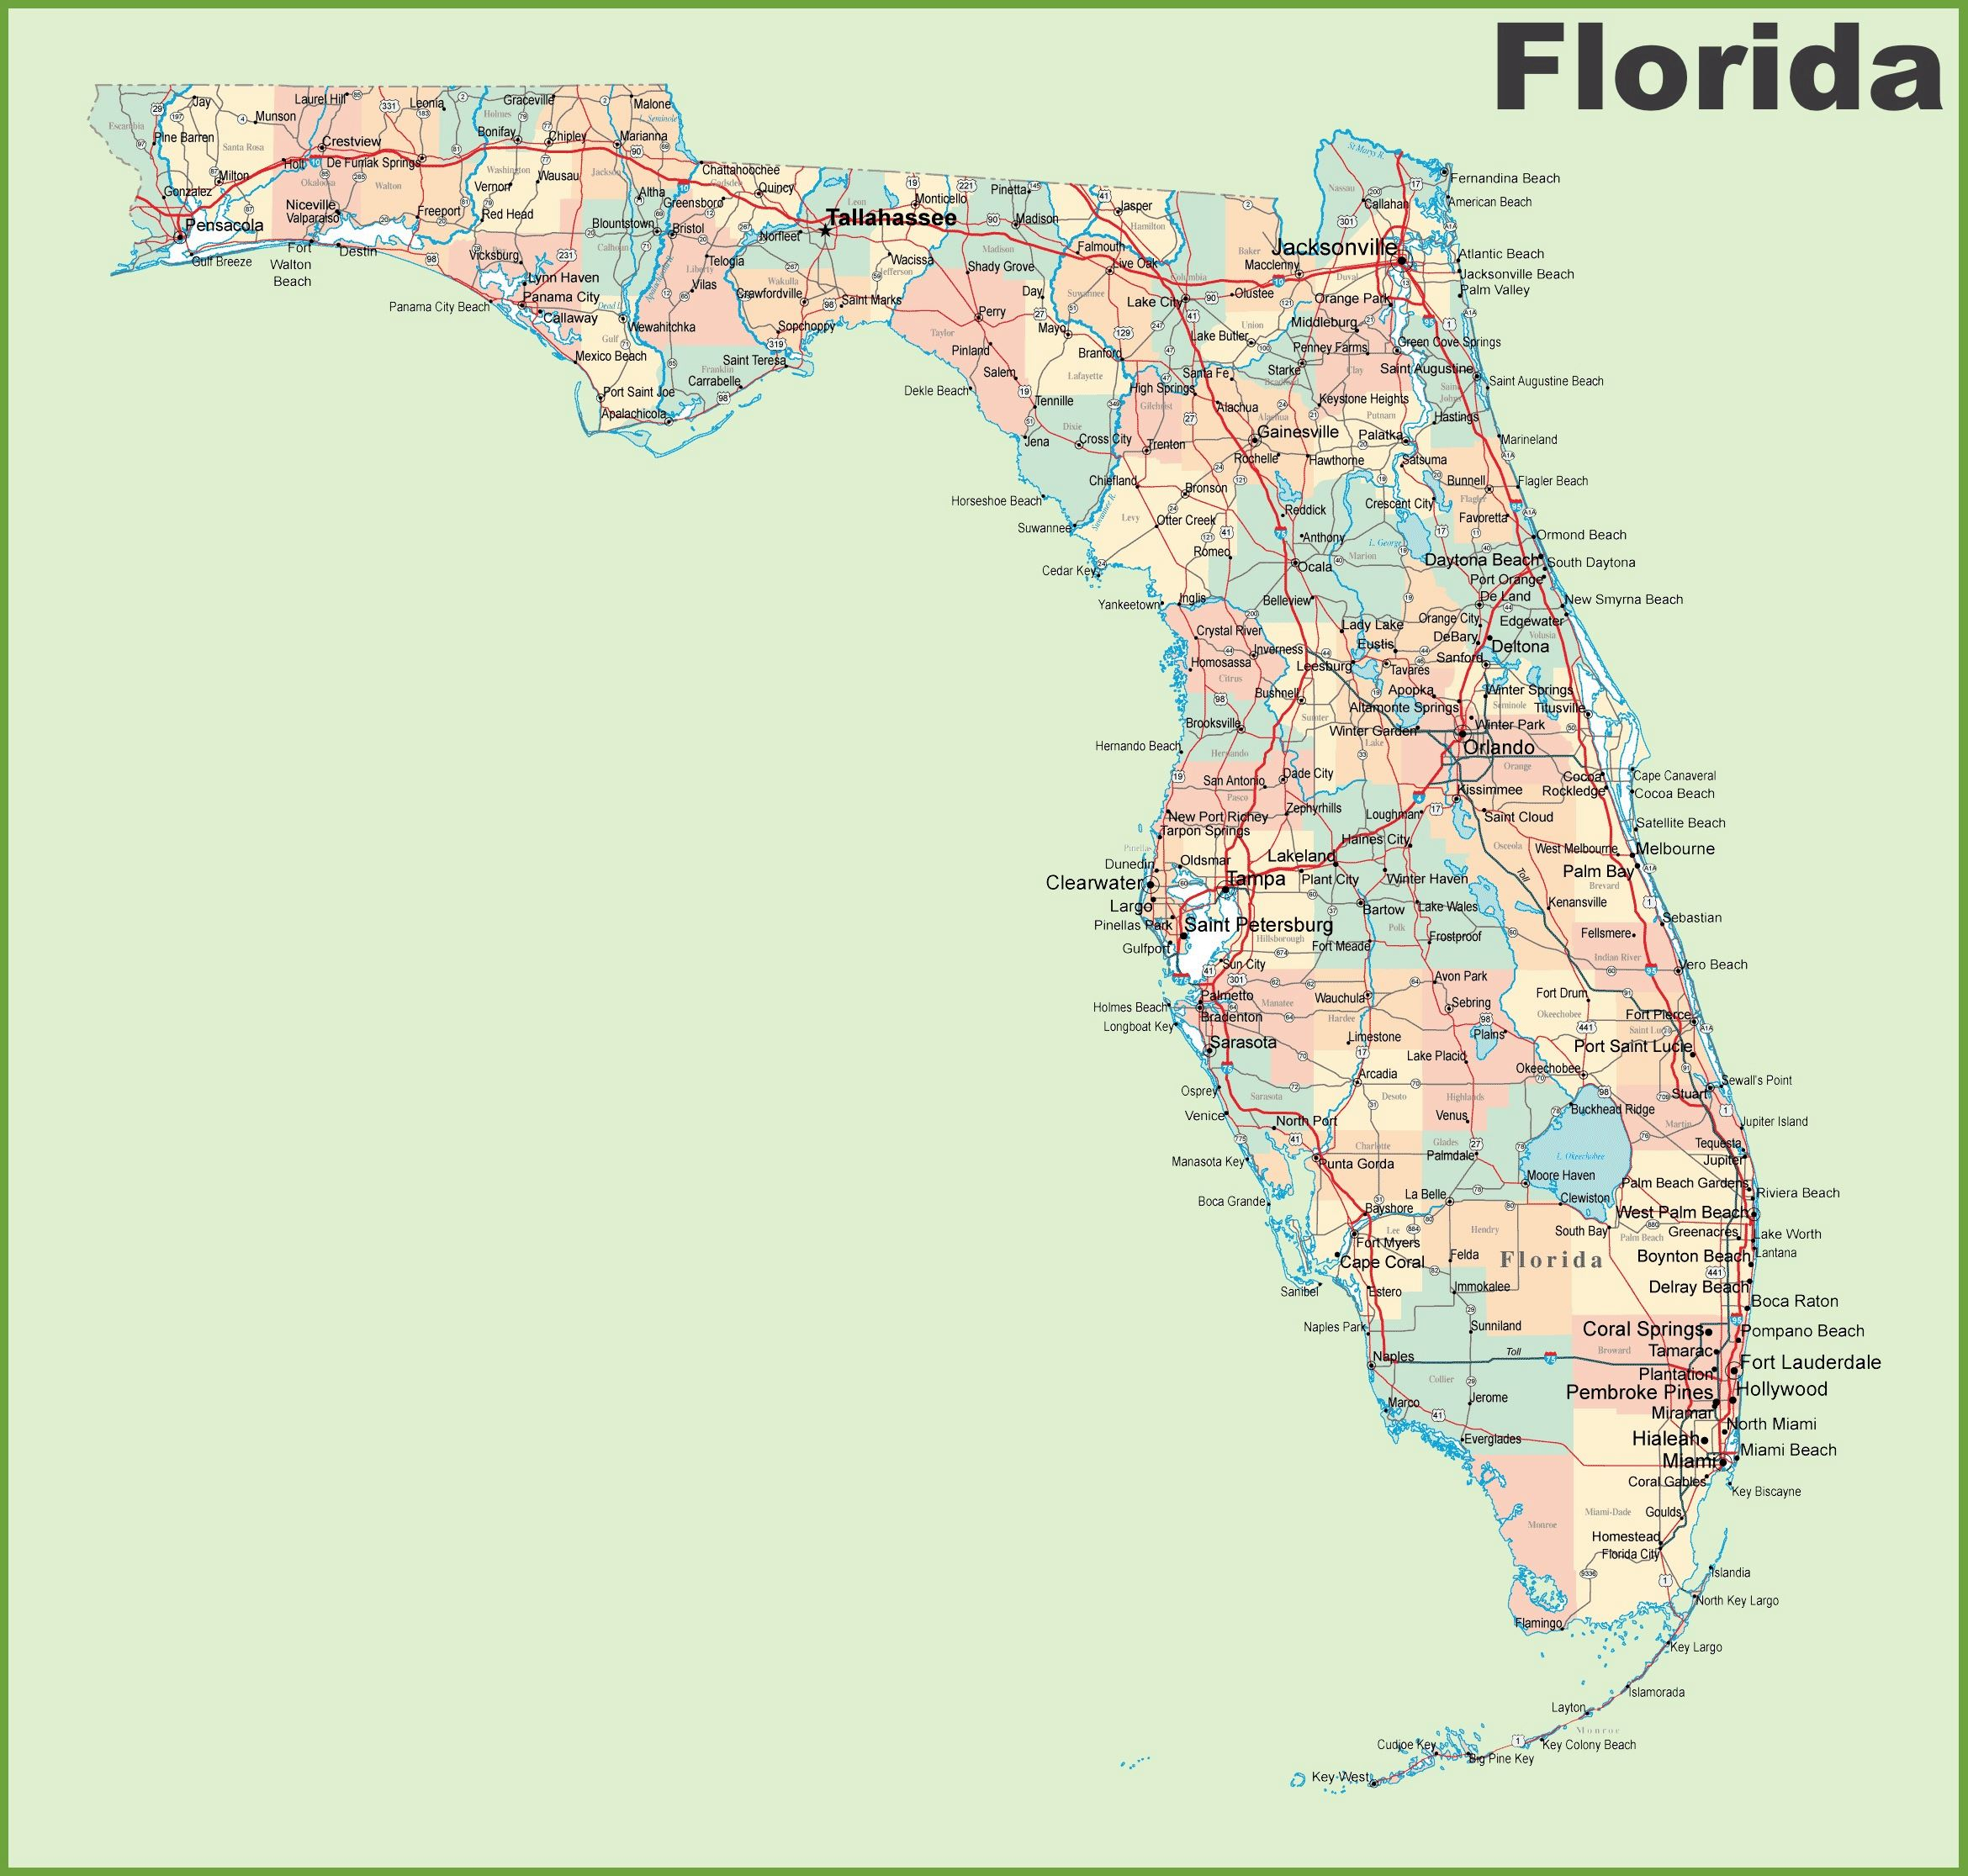 Large Florida Maps For Free Download And Print | High-Resolution And - Bowling Green Florida Map